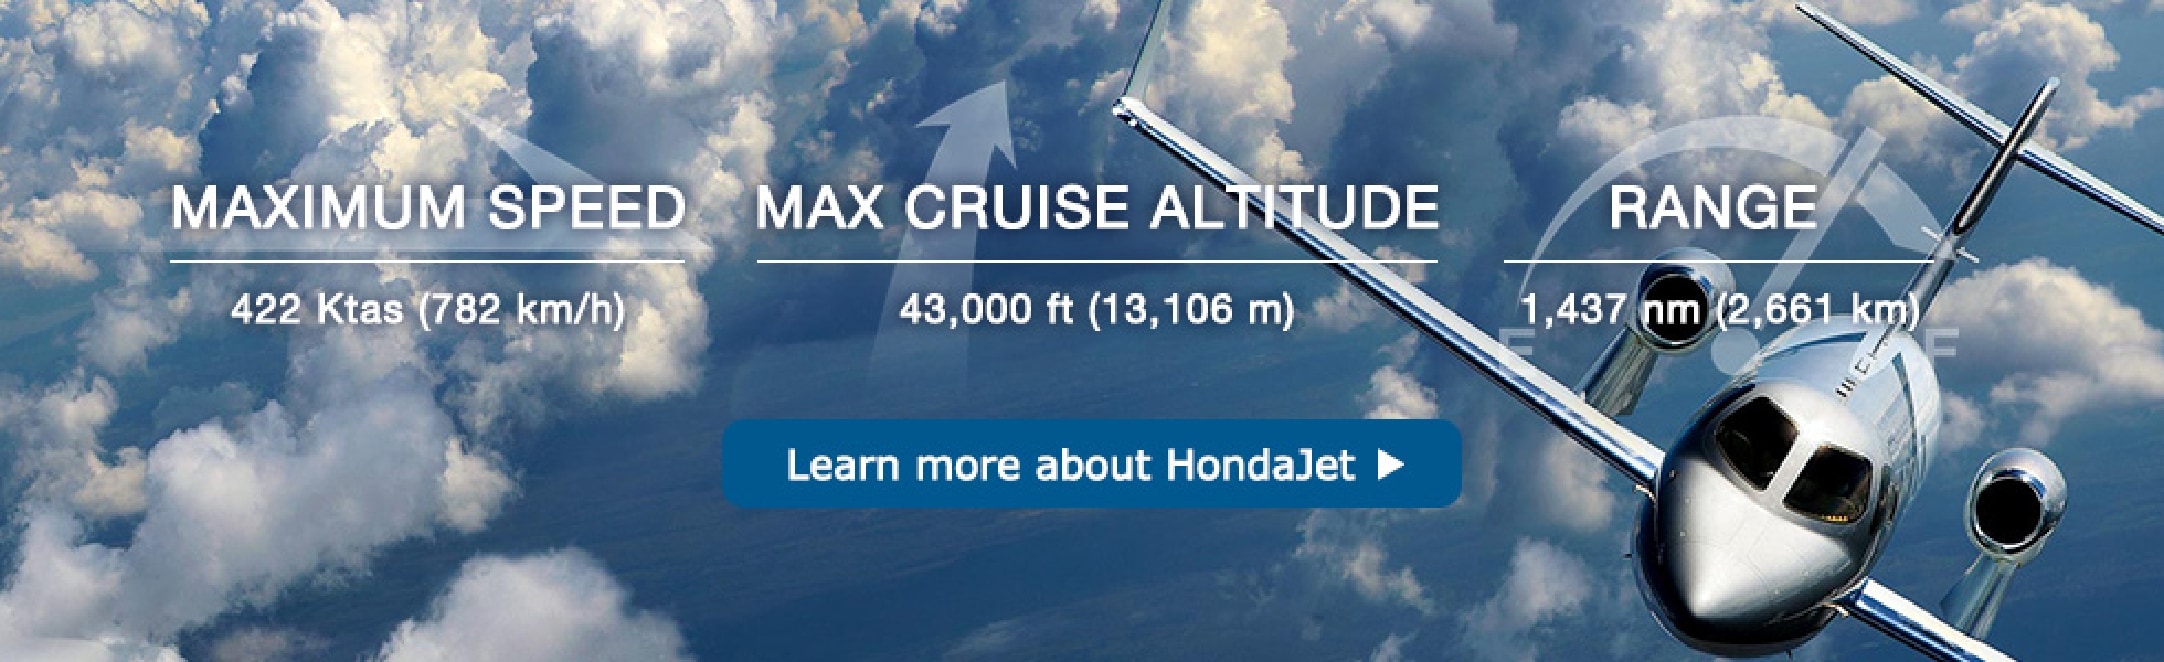 Learn more about HondaJet